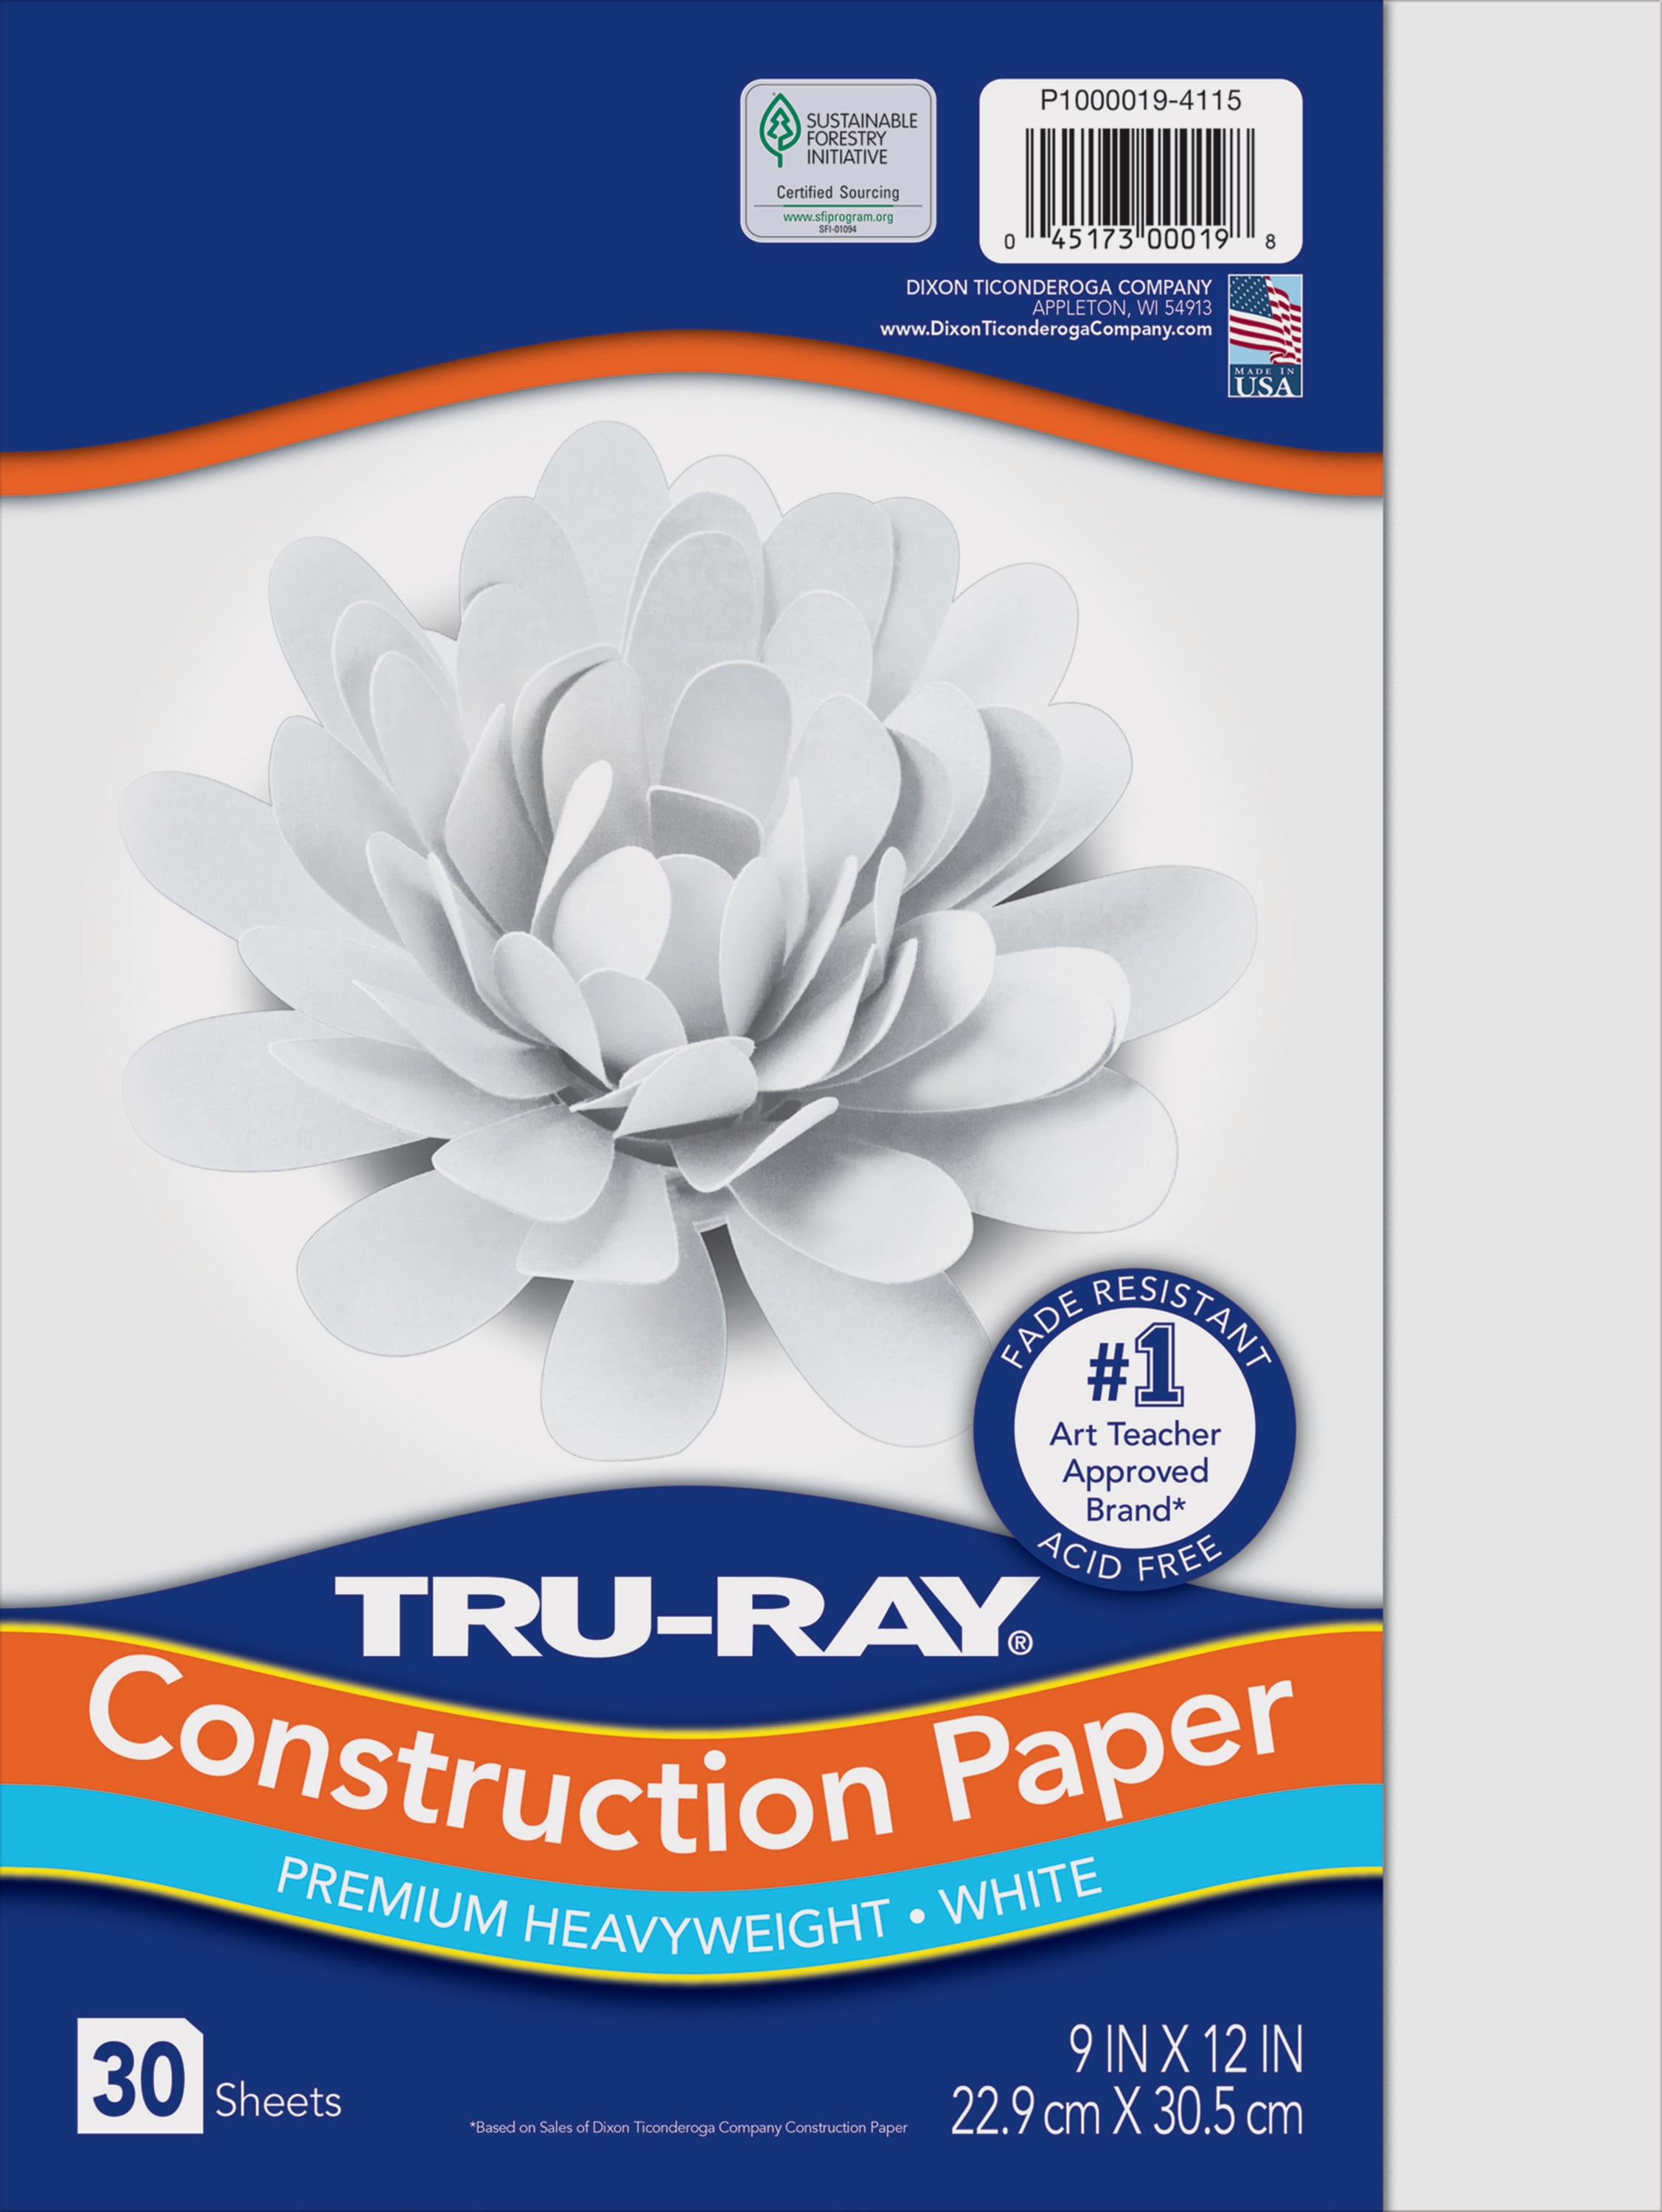 Tru-Ray 9 in x 12 in Construction Paper, White, 30 Sheets 